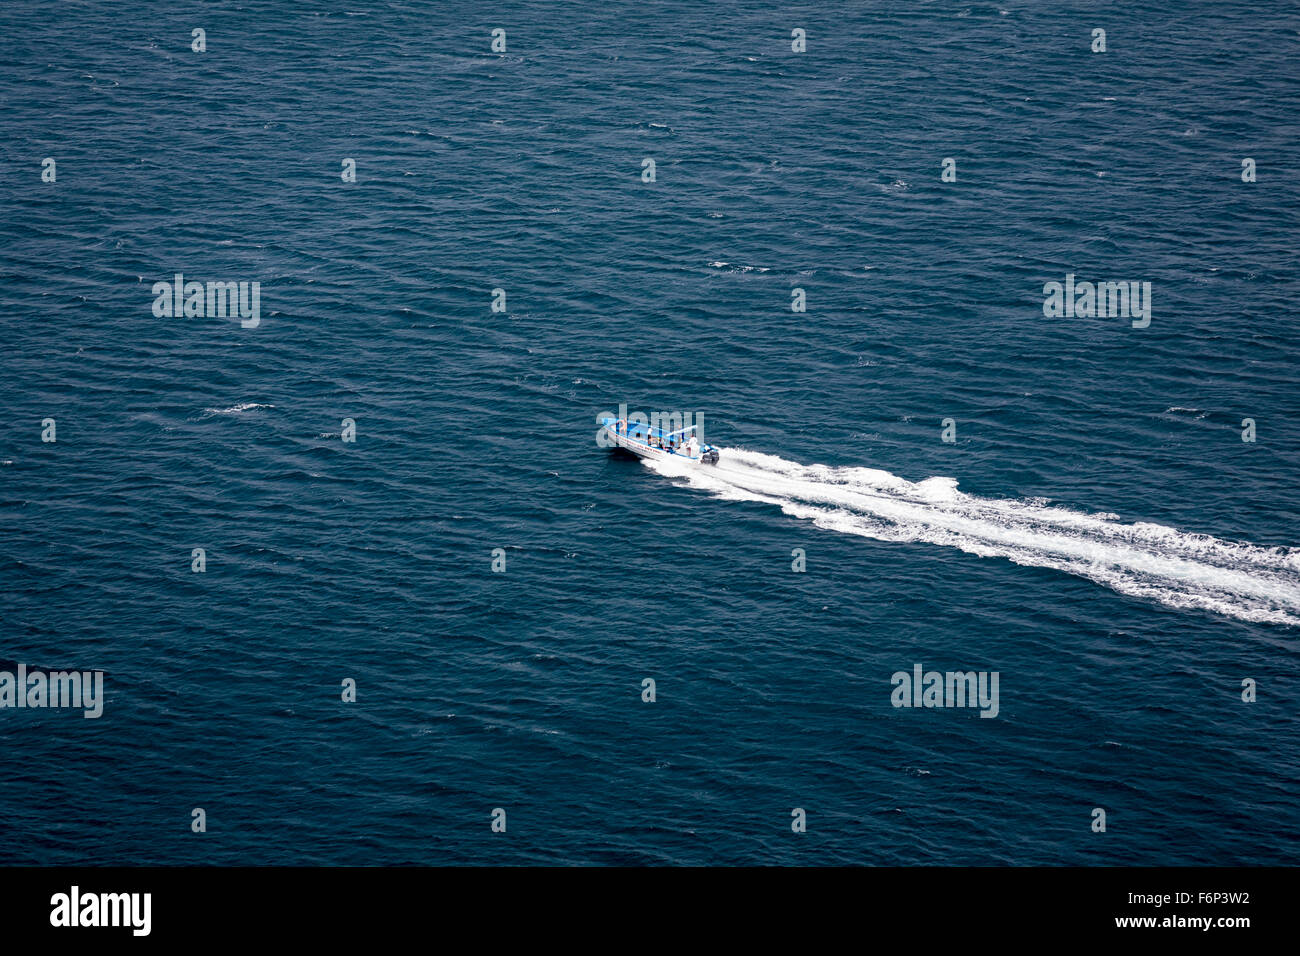 Viewed from above, a speed boat creates a dramatic white wash across a turquoise tropical sea. Stock Photo